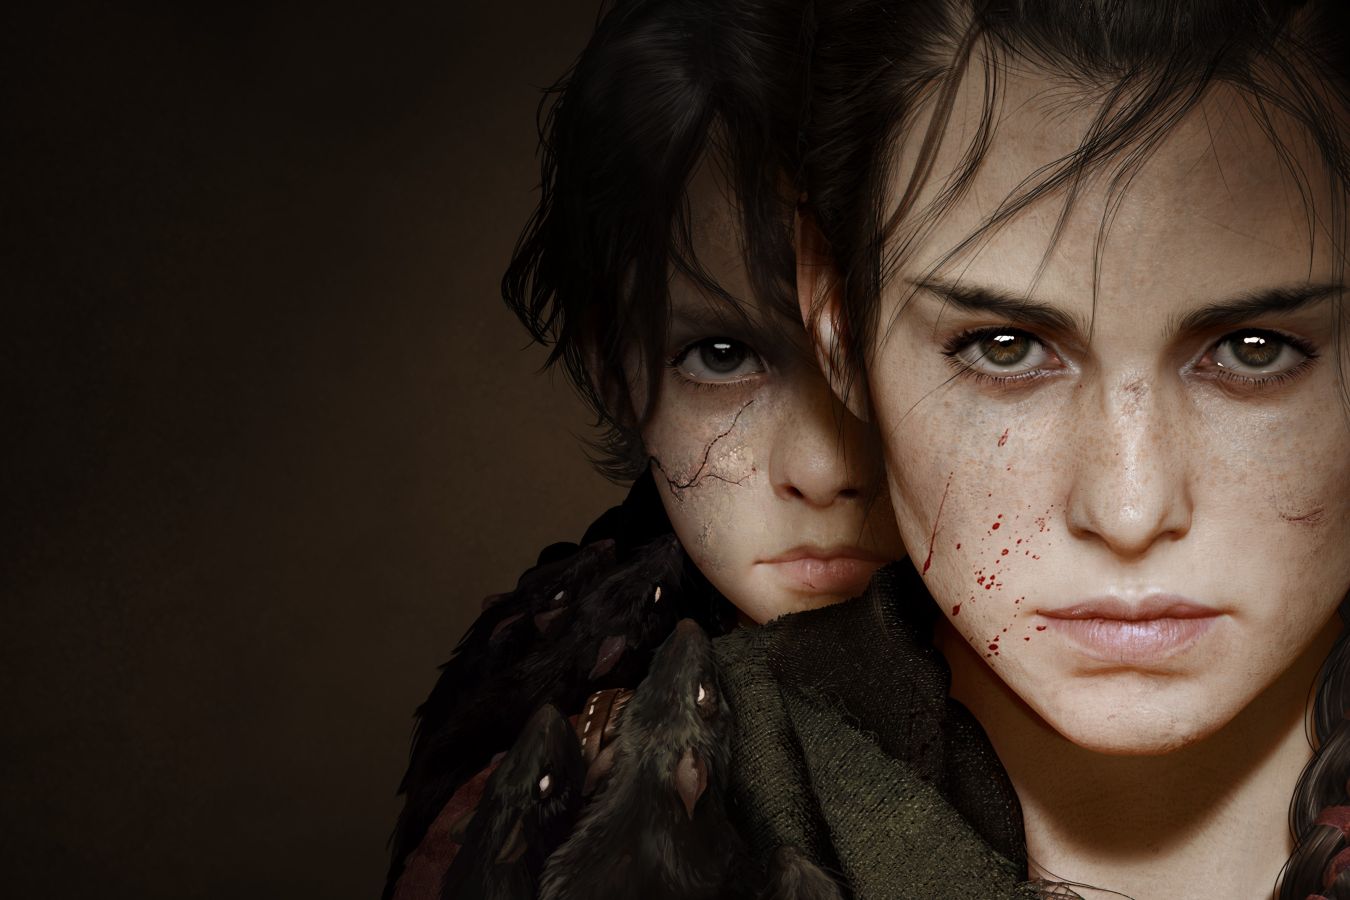 A plague tale gifts and curiosities